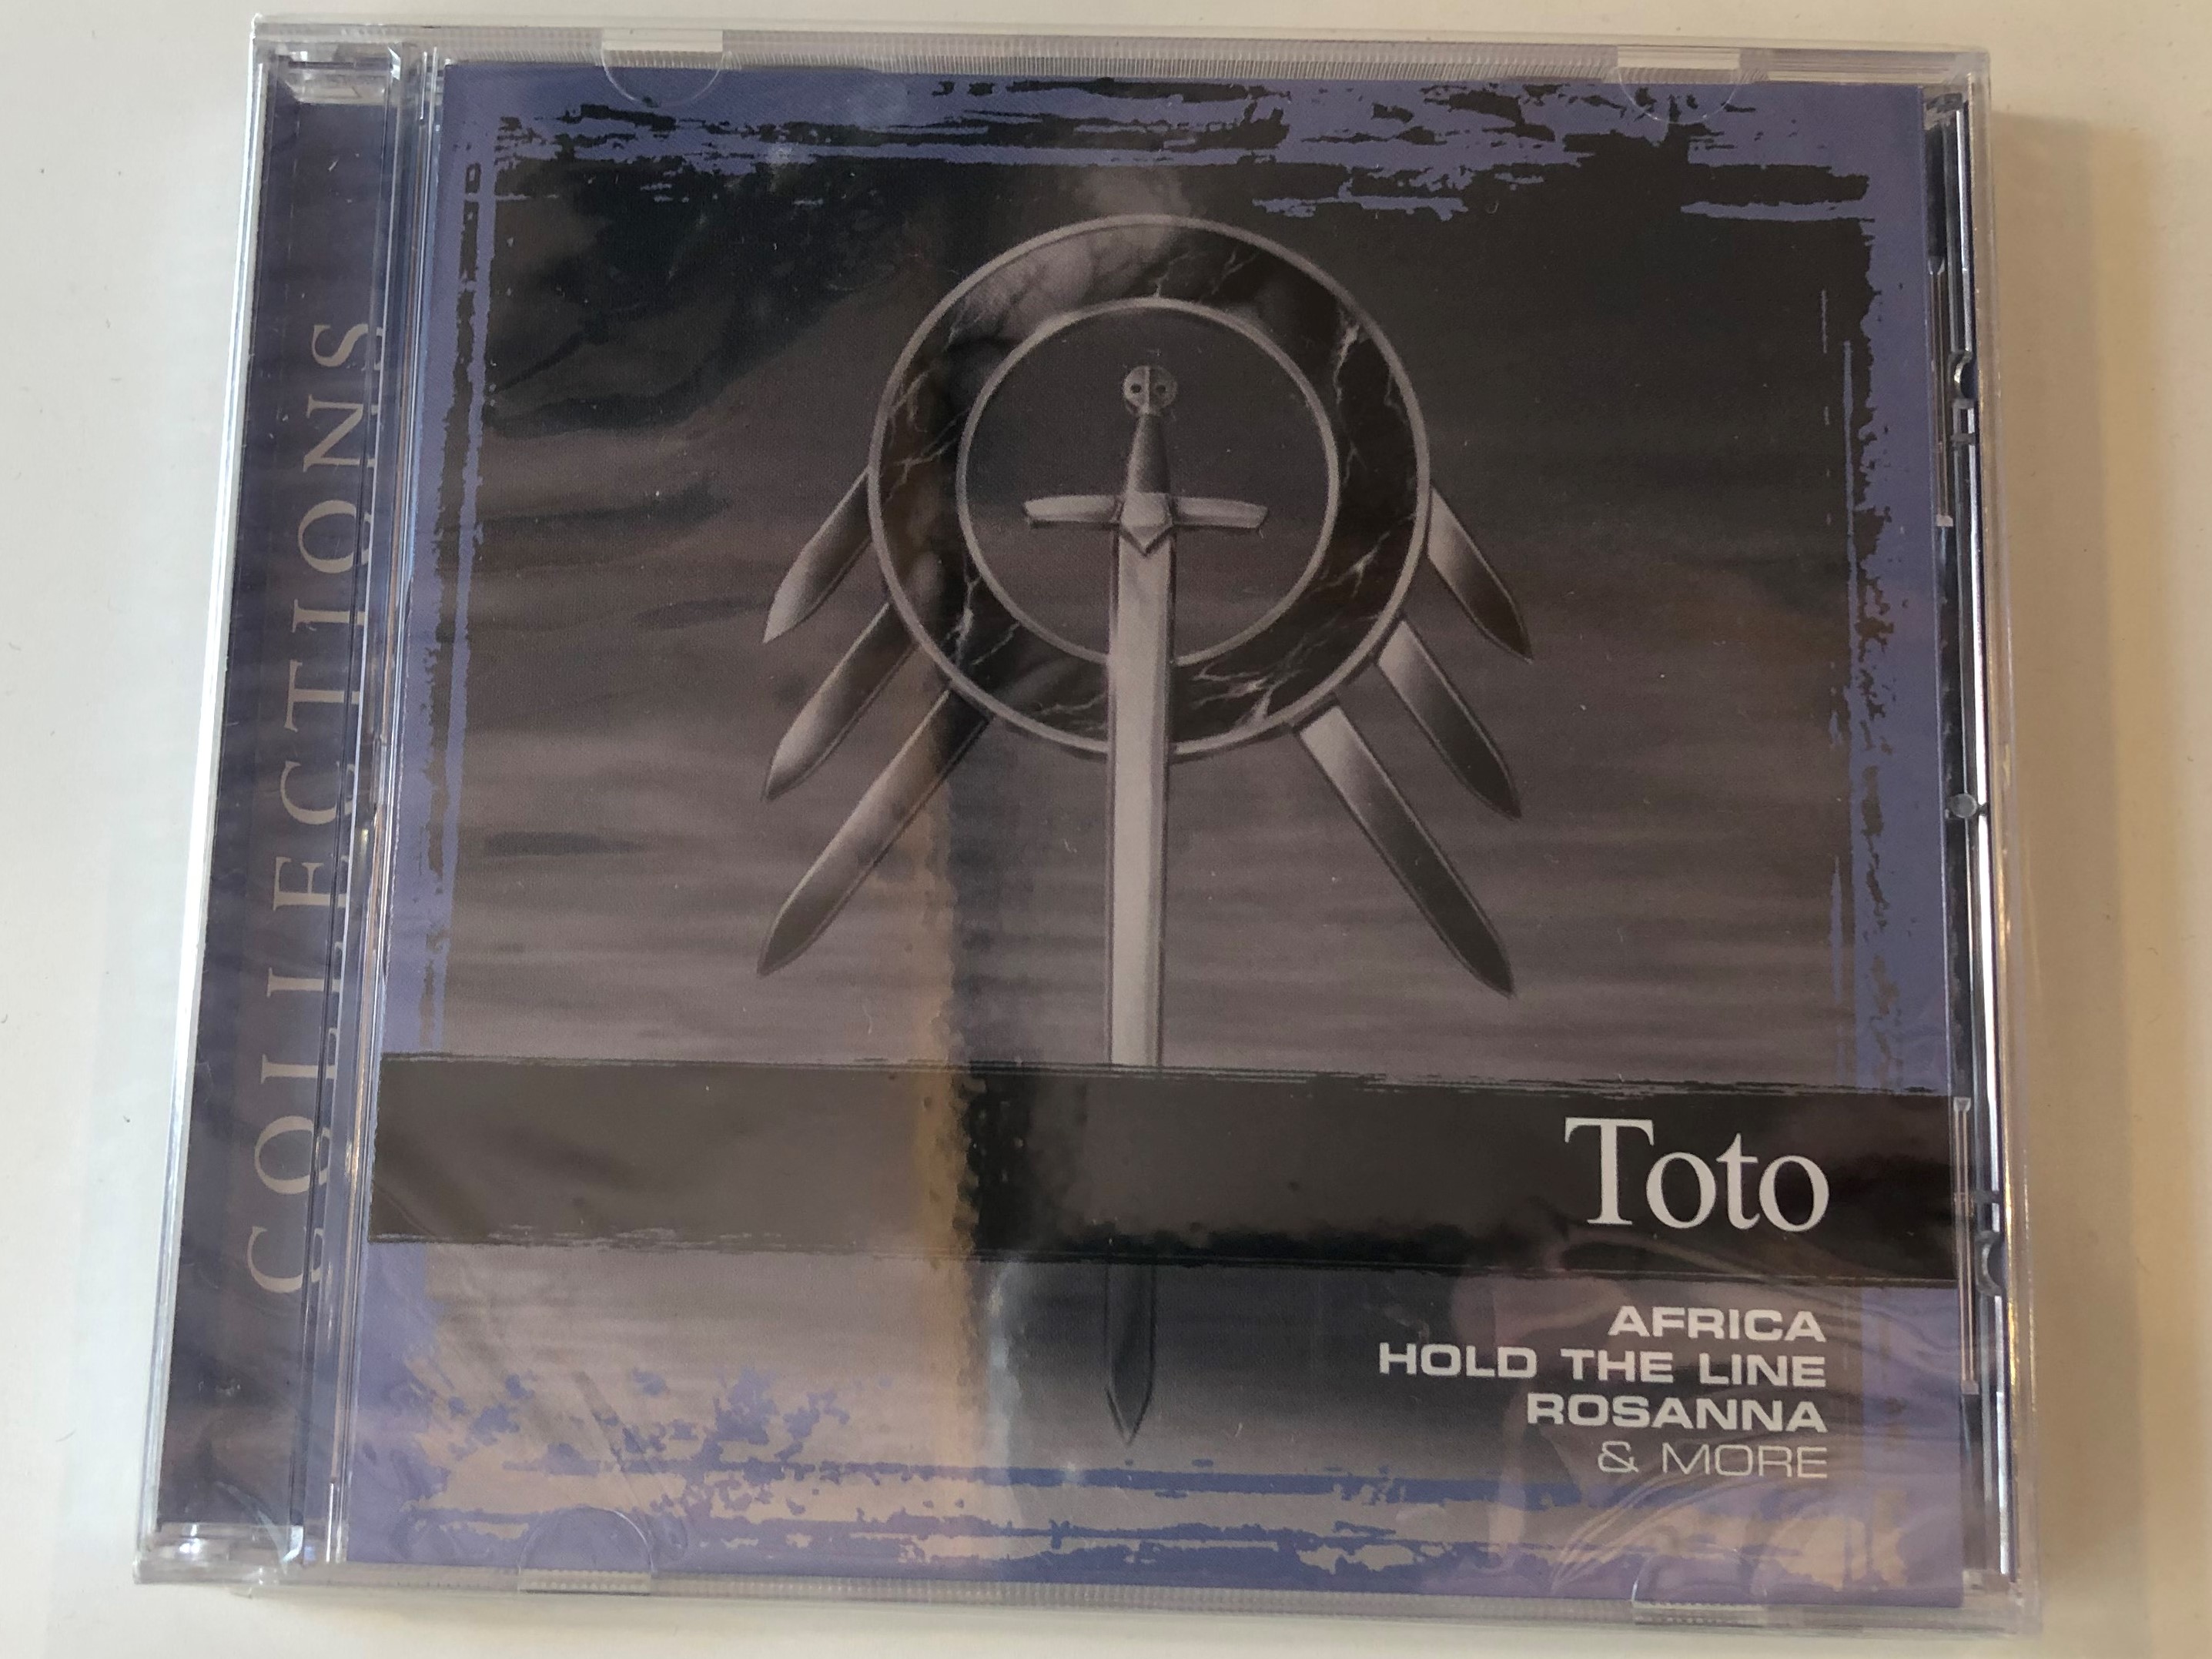 toto-collections-africa-hold-the-line-rosanna-more-sony-bmg-music-entertainment-audio-cd-2006-82876817062-1-.jpg